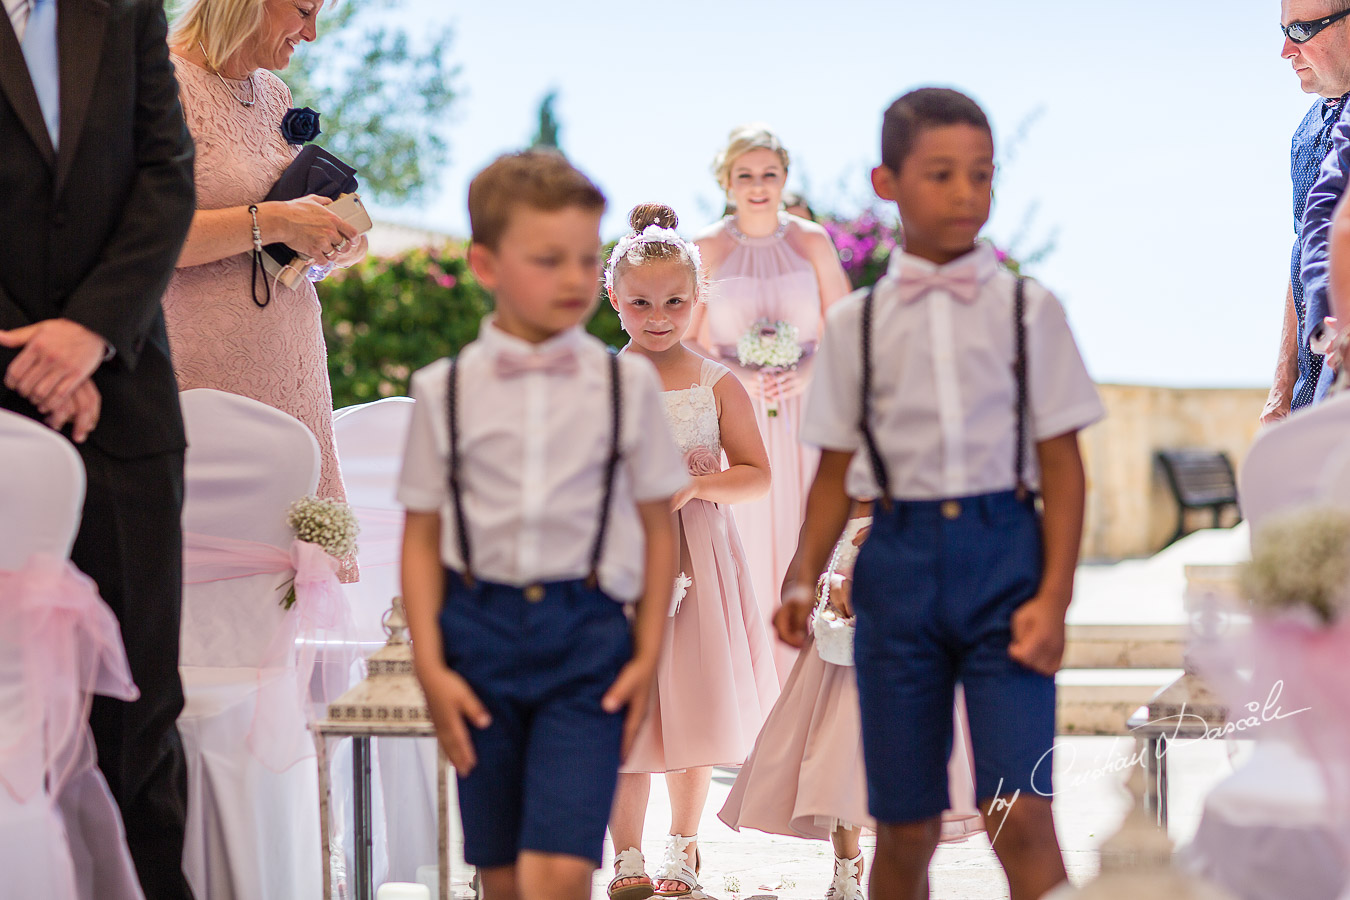 Moments with pageboys and flowergirls captured during a wedding at Aphrodite Hills Resort in Cyprus by Cyprus Photographer Cristian Dascalu.